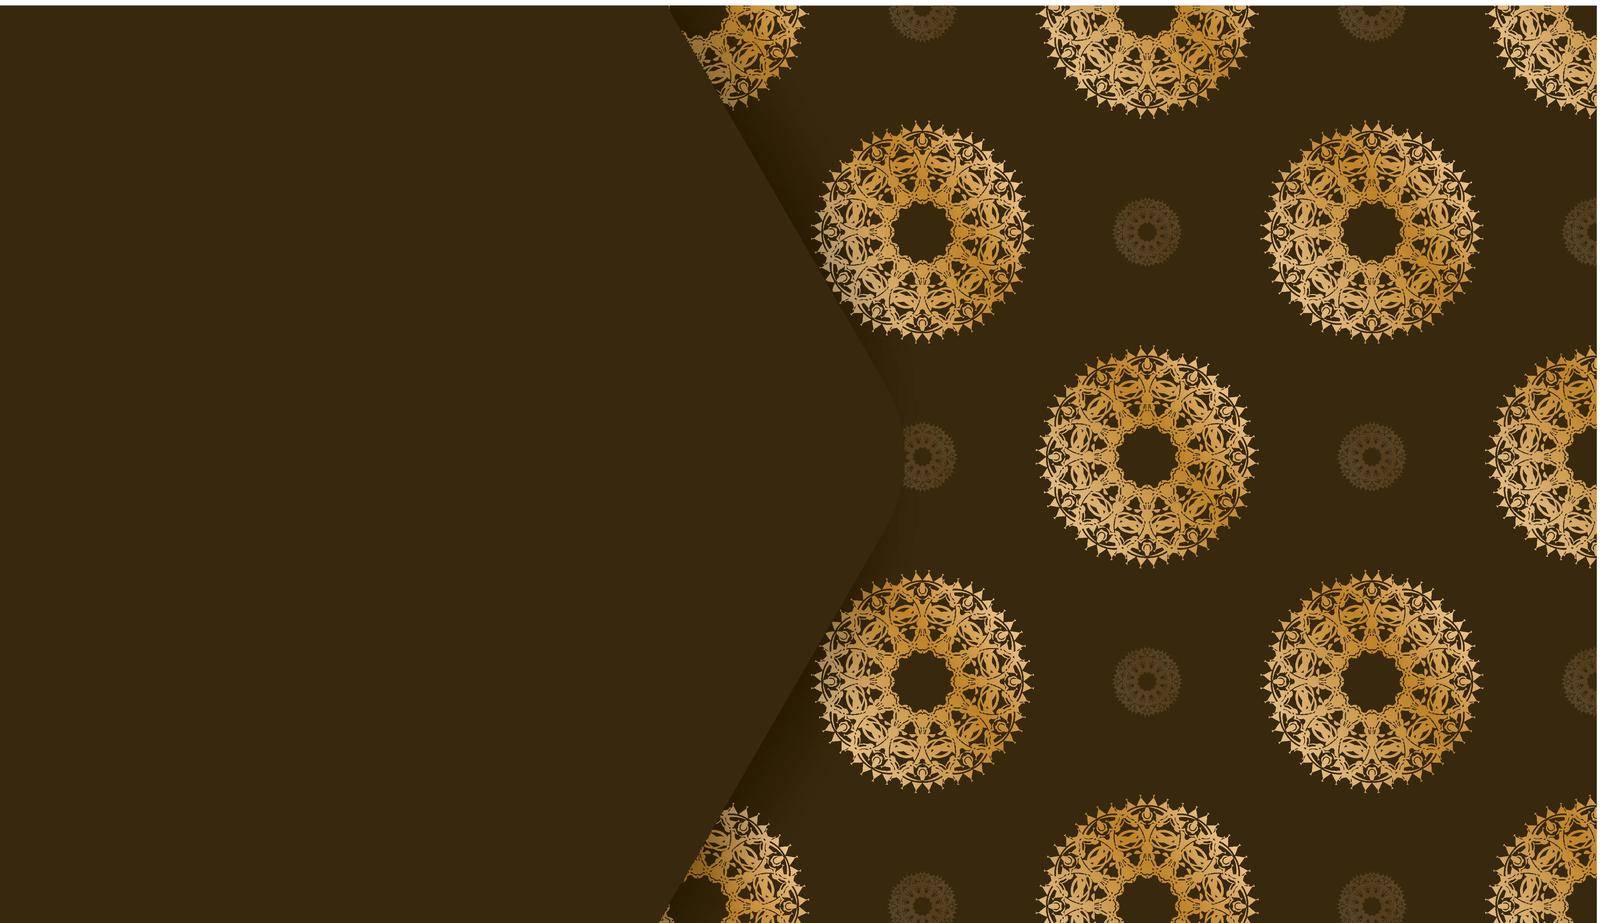 Background in brown with greek gold ornaments and logo spot by Javvani